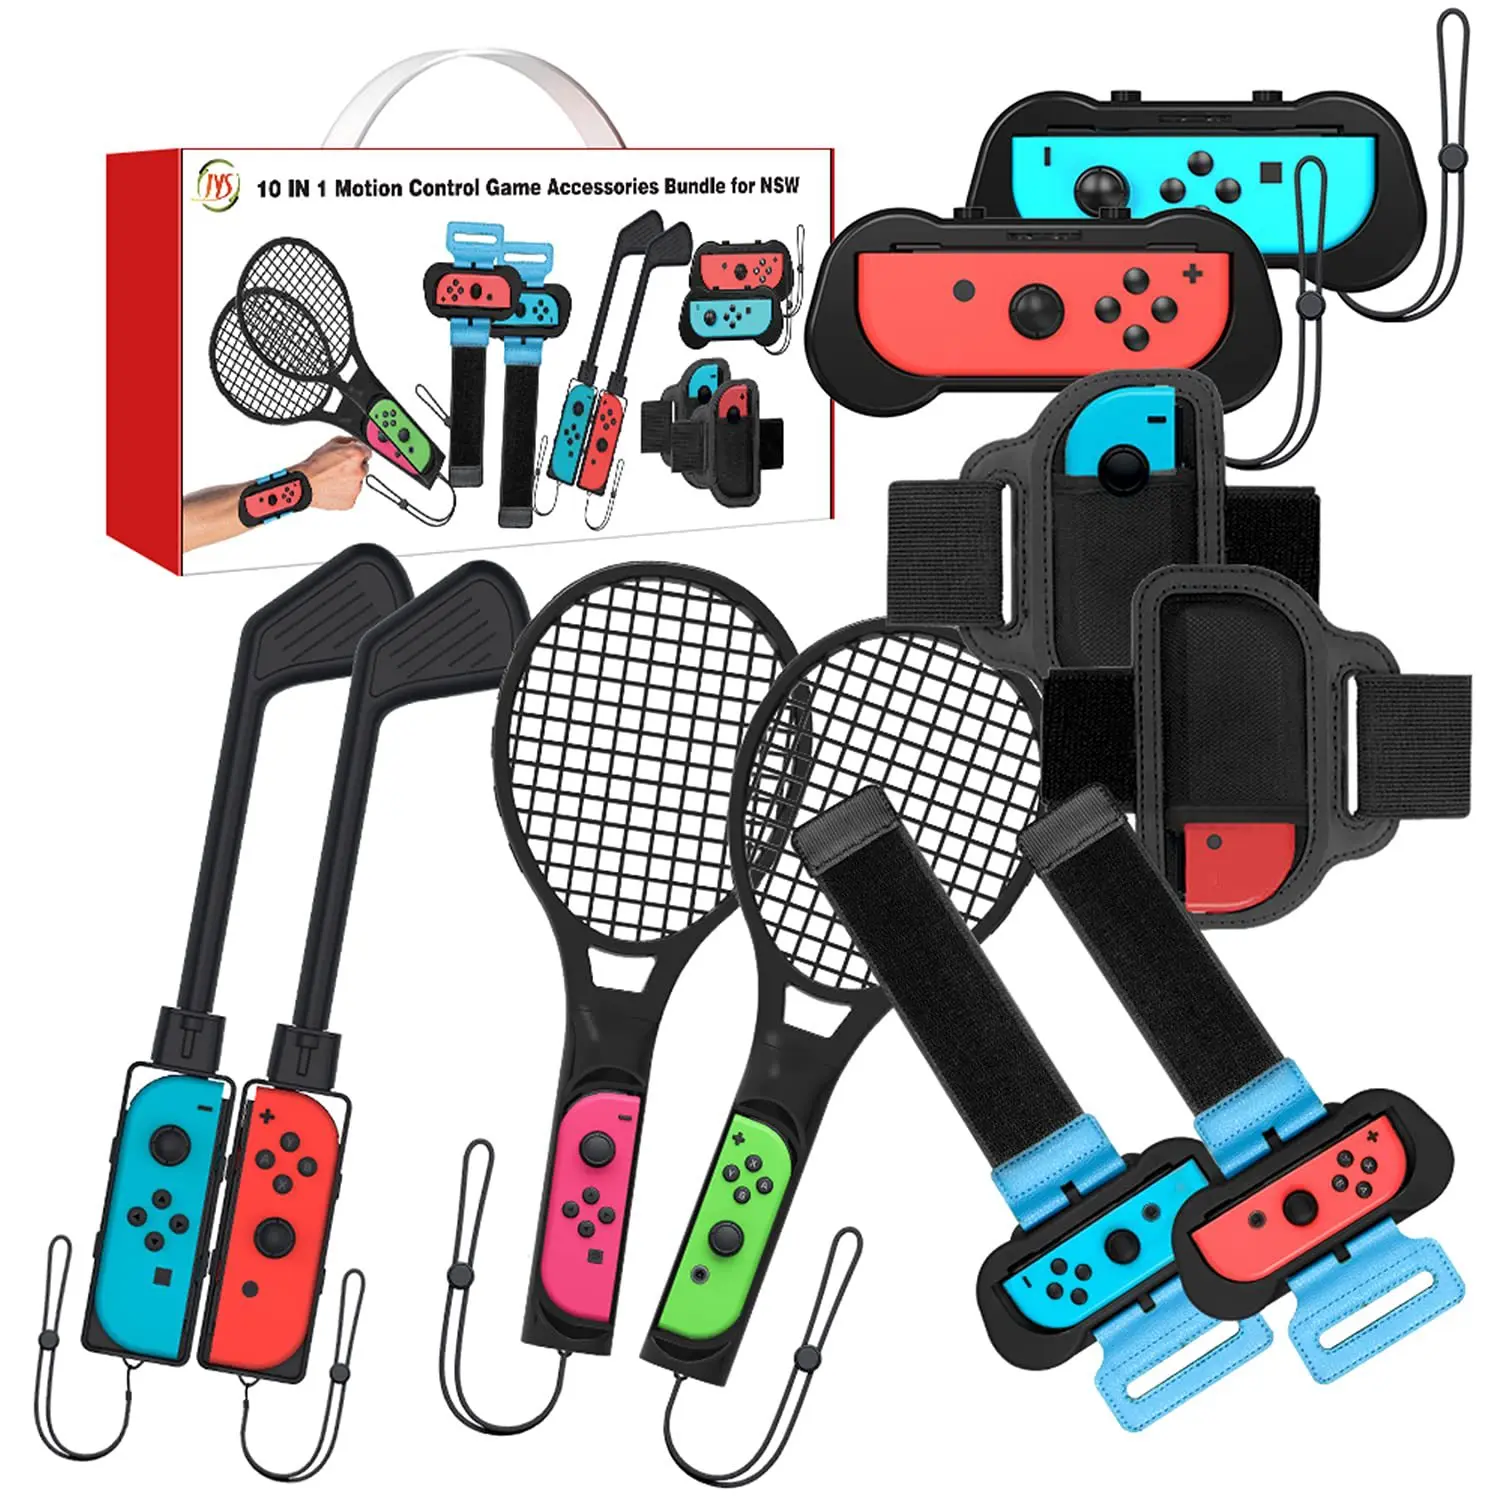 

Hot 10 In 1 For Nintendo Switch Game Accessories Set NS Joycon Controller Handle Grip Dance wristband Golf clubs Joystick Kit